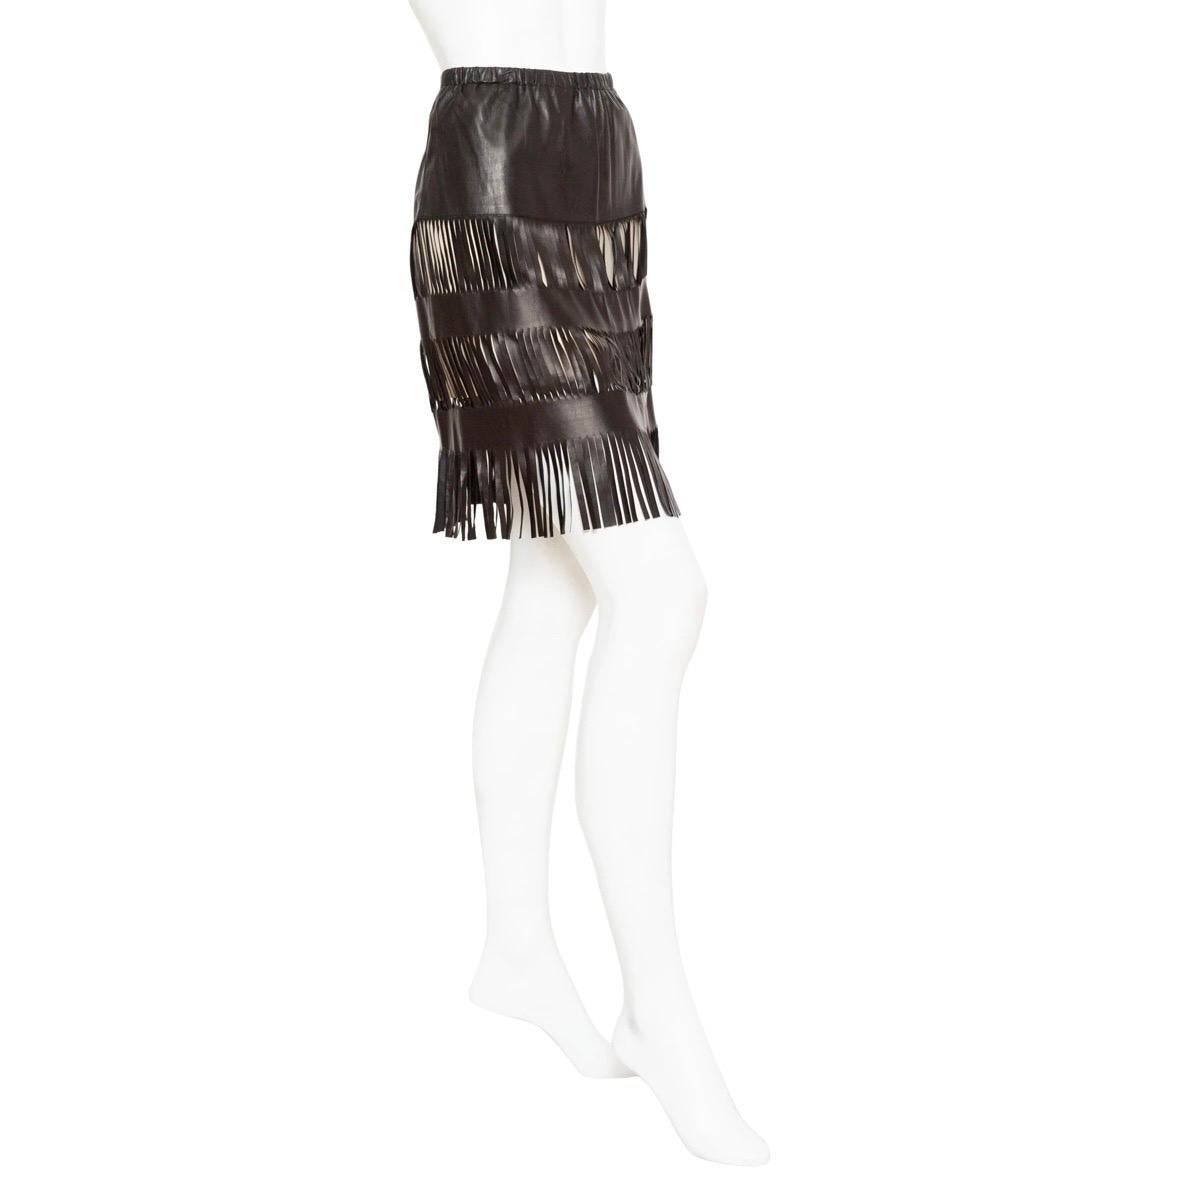 Gucci 1999 Black Lambskin Fringed Skirt

Spring 1999 Ready-to-Wear Collection by Tom Ford
Black/Beige
Above the knee
Cutout accents throughout
Fringed hem
Leather covered elasticized hem
Pull on
100% leather; 100% silk lining
Made in Italy
Good